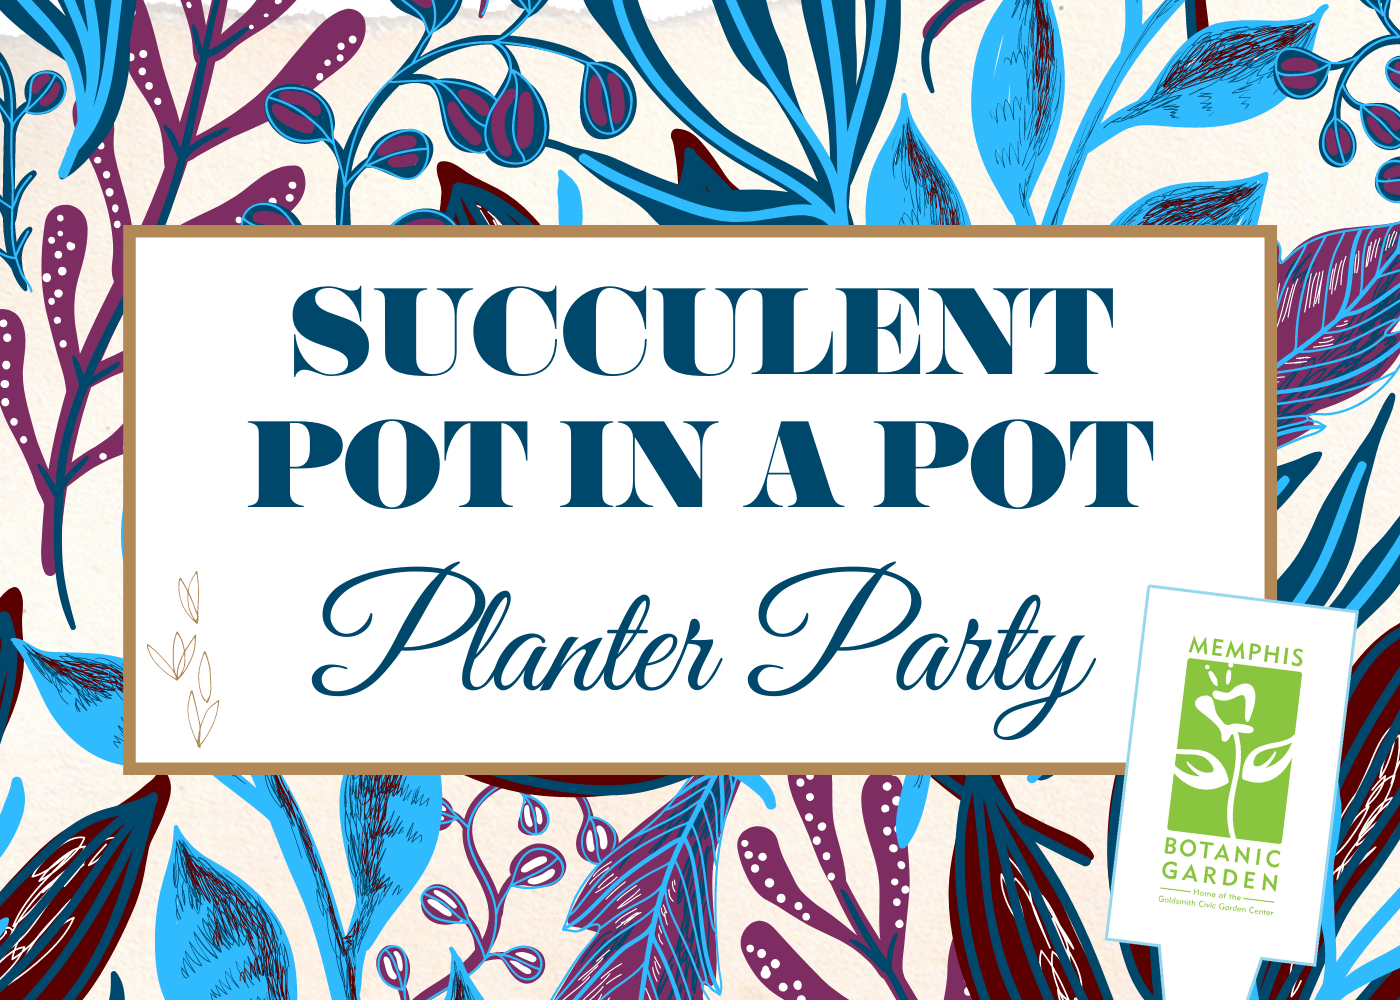 Succulent Pot in a Pot Planter Party at the Garden July 16 